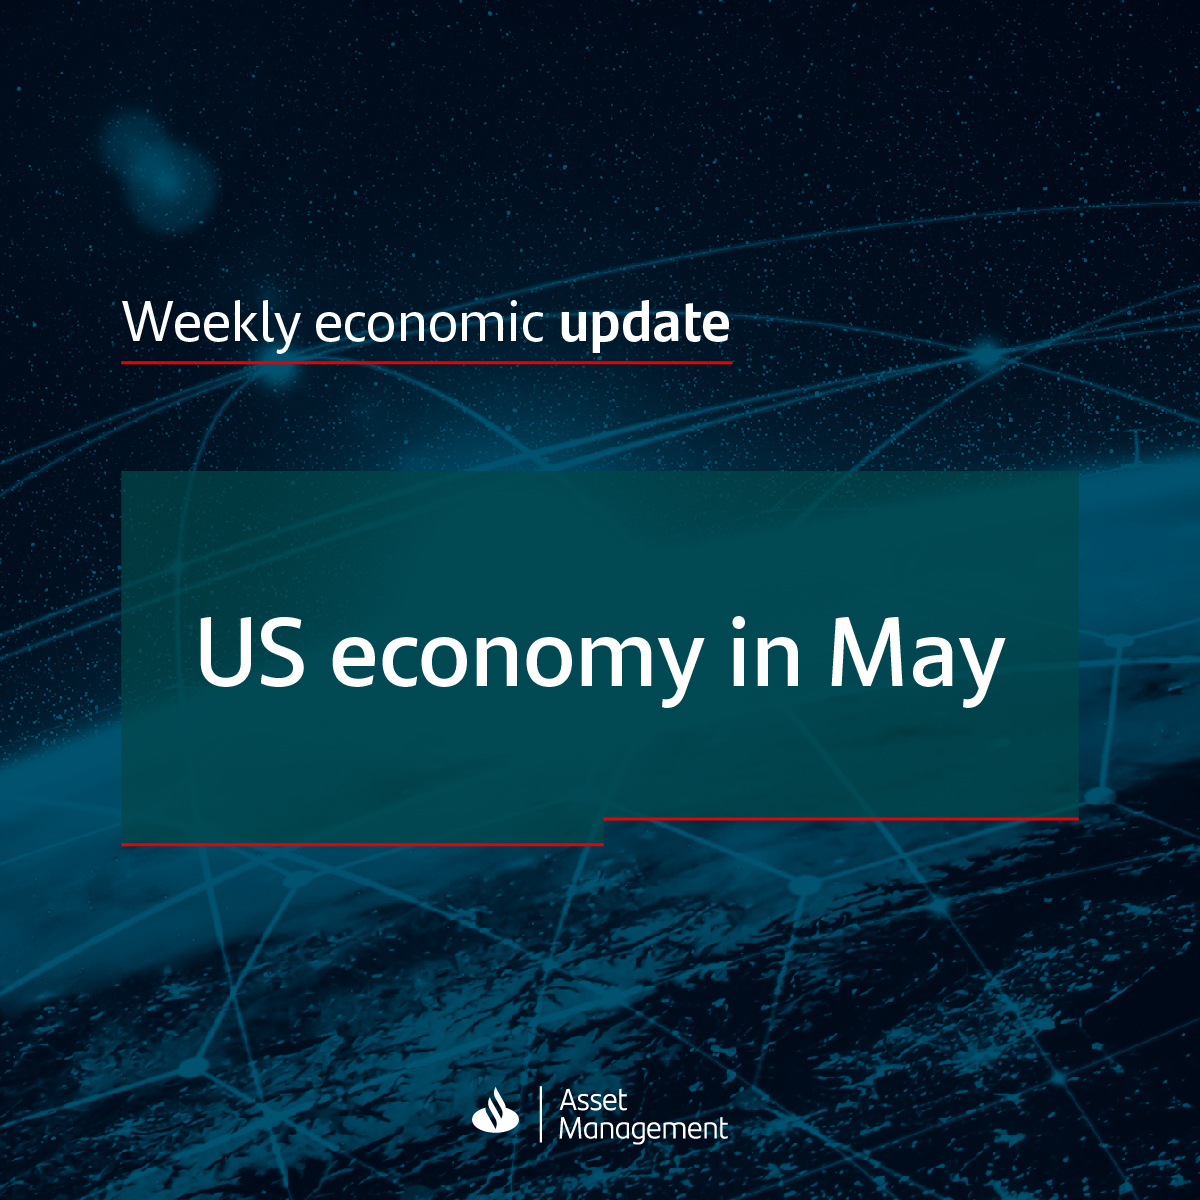 Data released in the US continue to provide mixed signals about the pace of growth.

#WeeklyEconomicUpdate